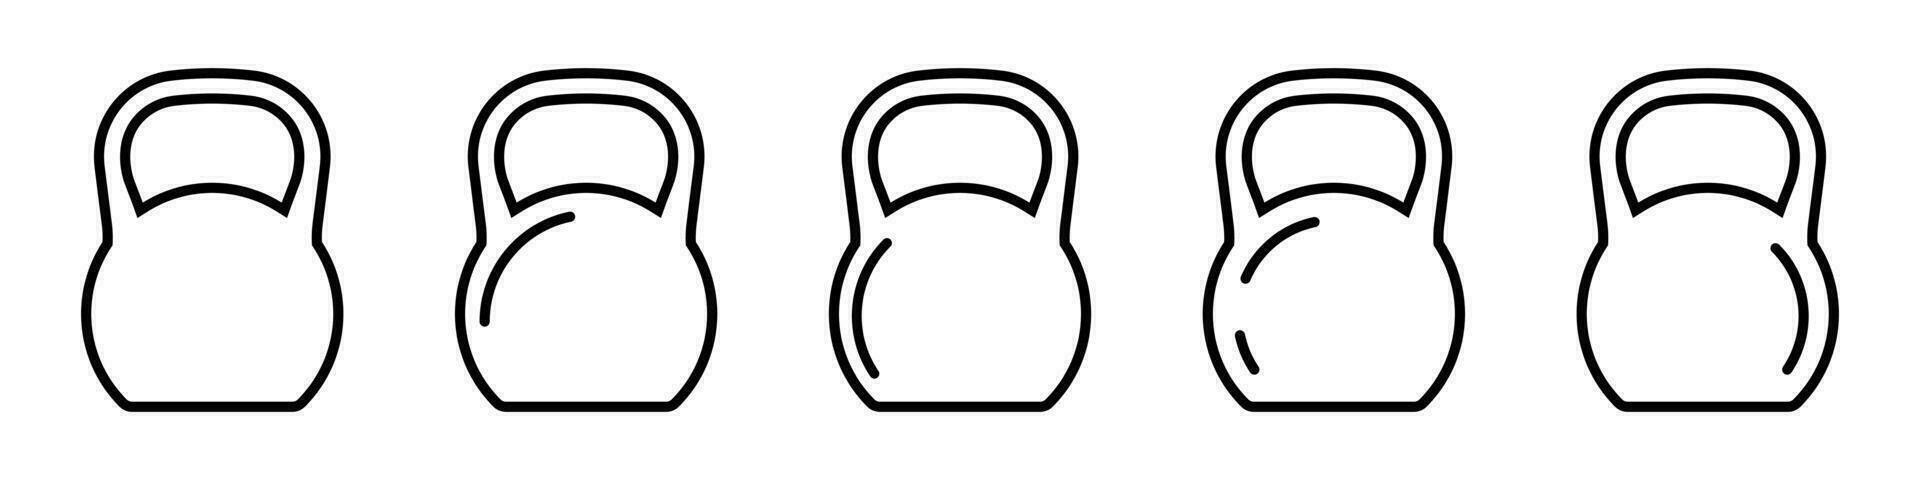 Kettlebell line icon. Weight icon, training equipment flat vector icon for exercise apps and websites.